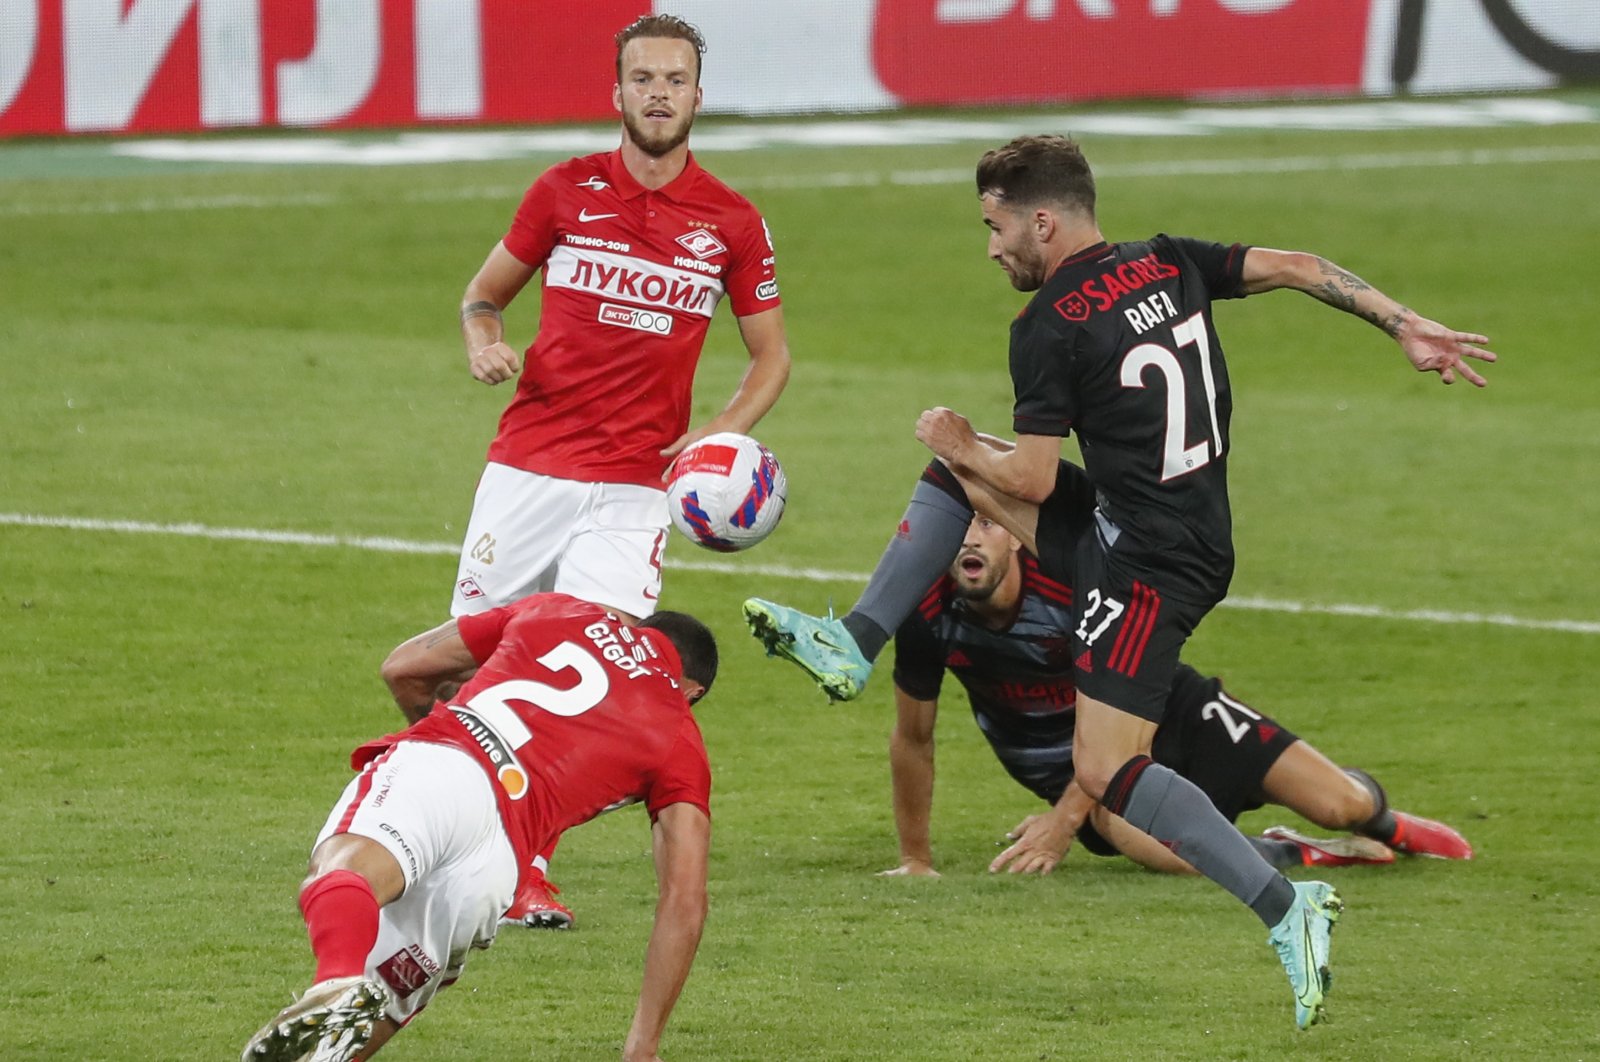 Benfica's Rafa Silva (R) in action against Spartak Moscow players during a UEFA Champions League qualifier match in Moscow, Russia, Aug. 4, 2021. (EPA Photo)
